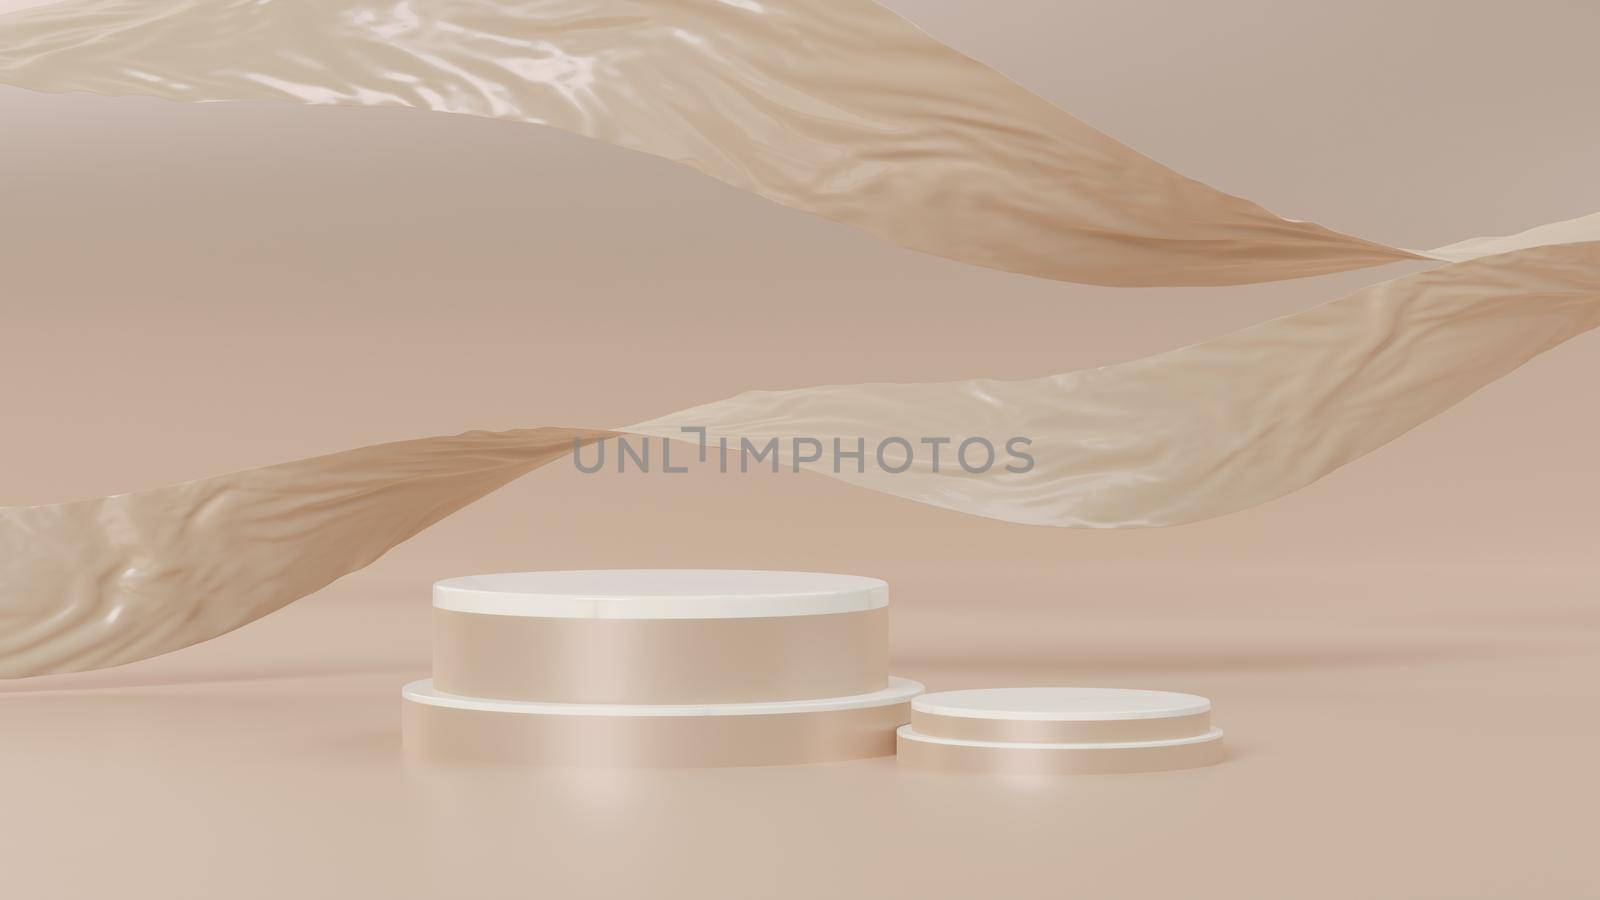 white cylinder with abstract modern background, 3d model mockup.